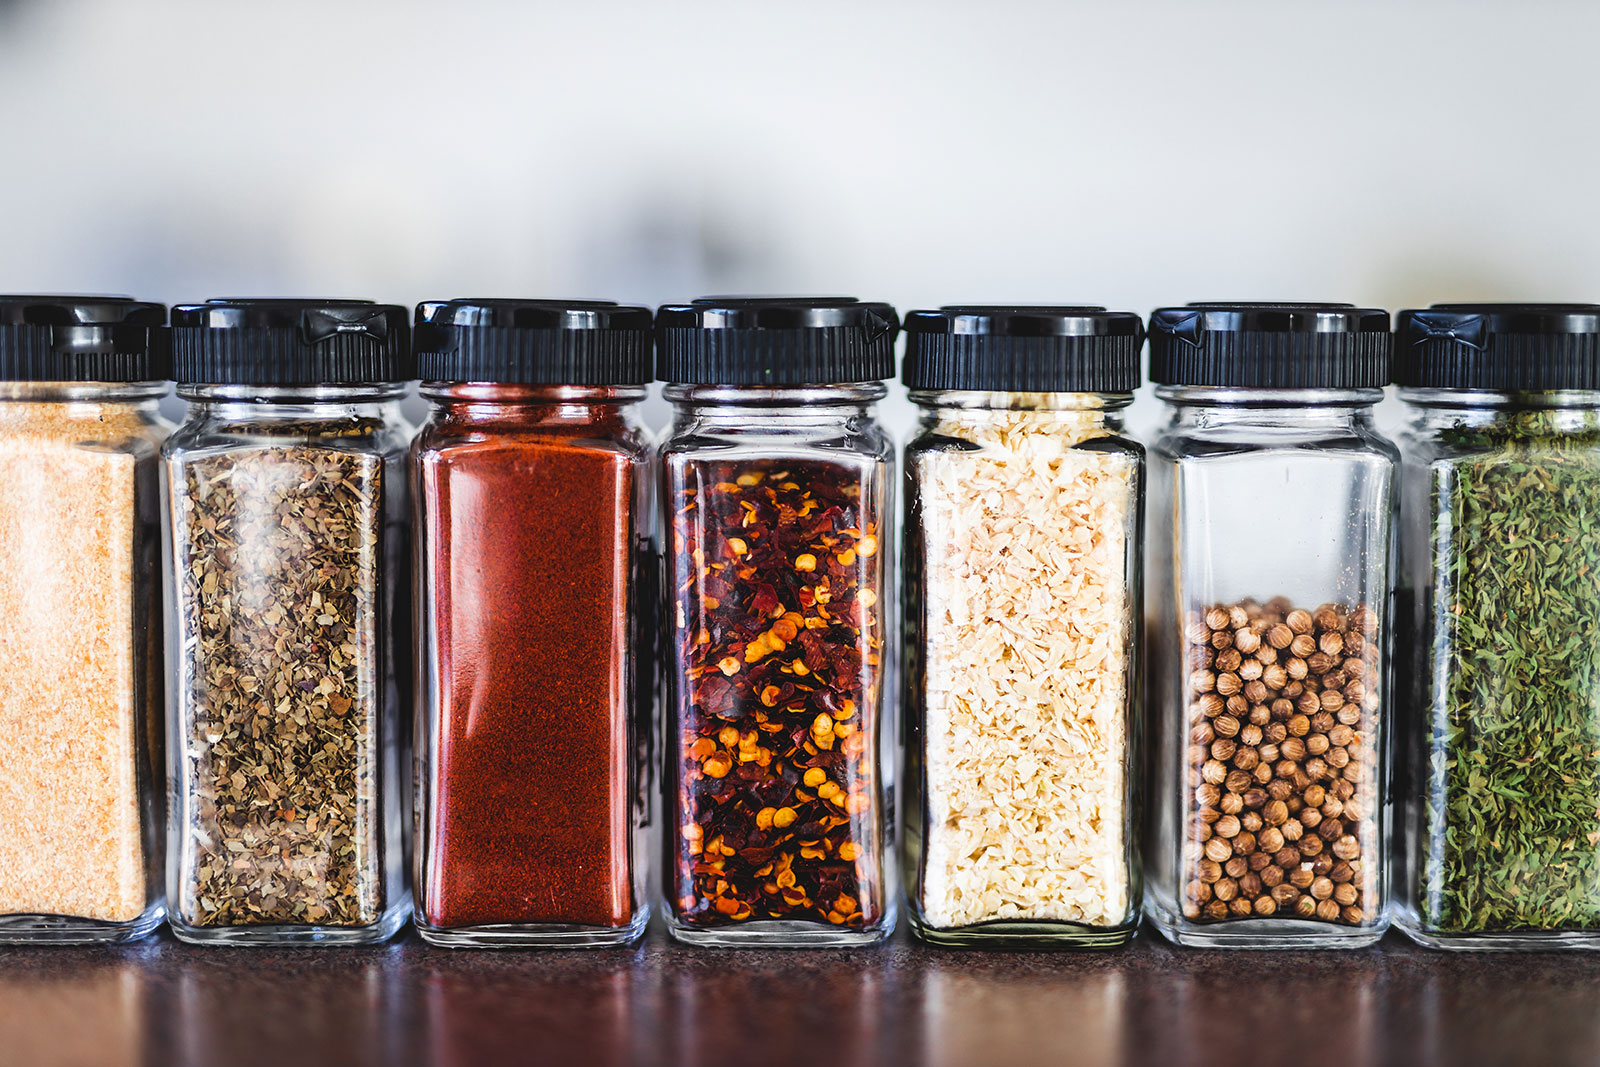 Row of spices in glass containers.